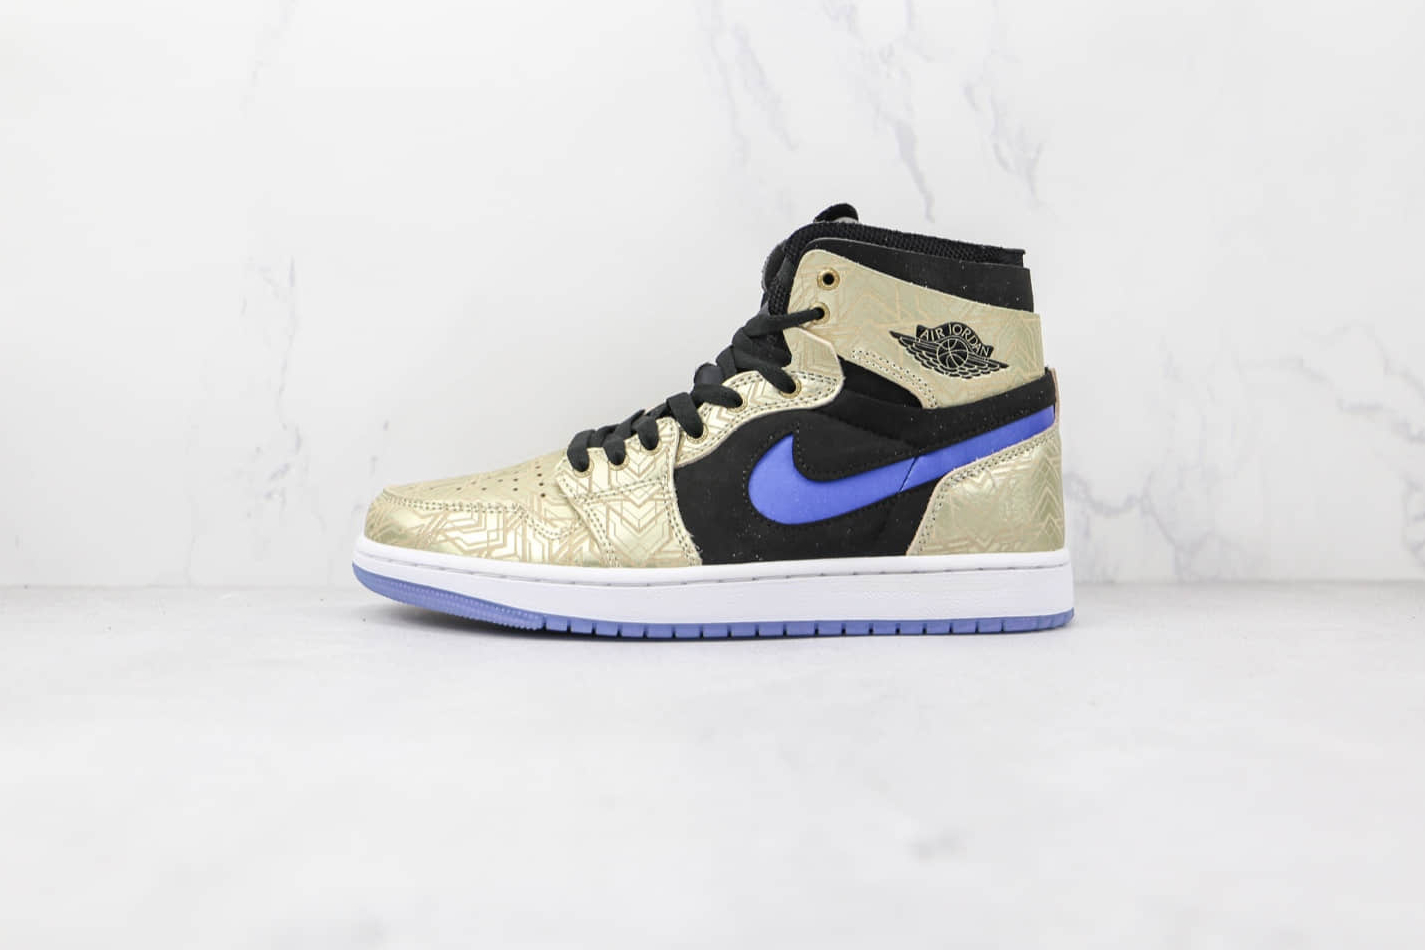 Air Jordan 1 Zoom Comfort 'Gold Laser' DQ0659-700 - Stylish and Comfortable Sneakers